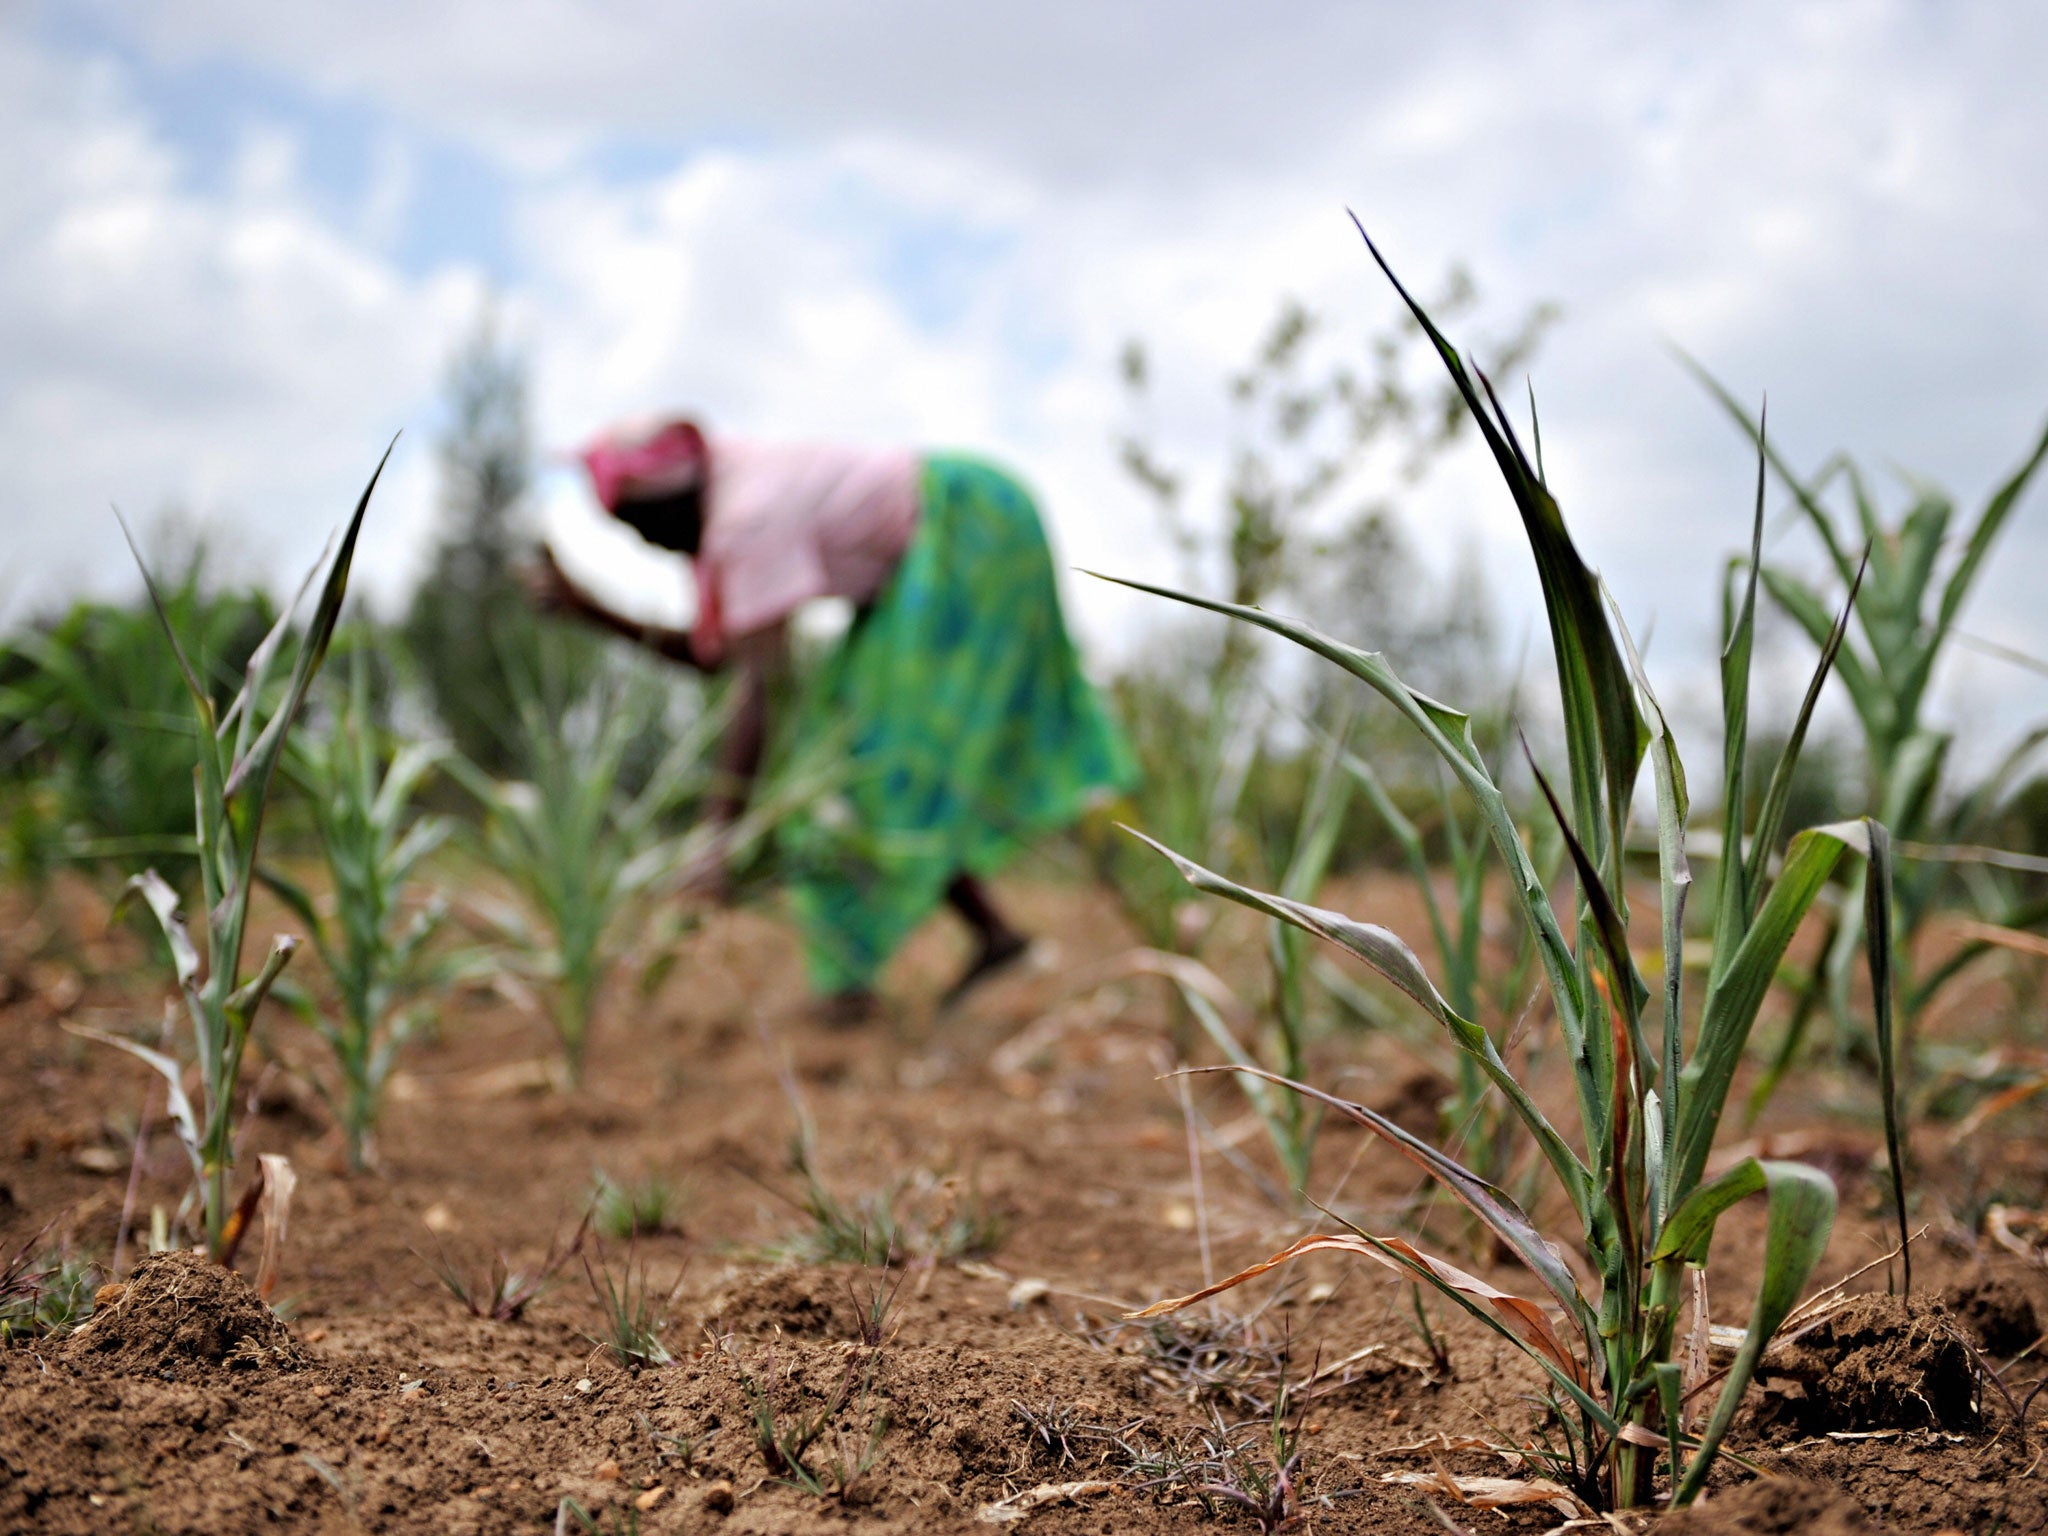 Climate change could cause crop yields of maize and wheat to fall between 10 and 20 per cent by 2050, Oxfam said